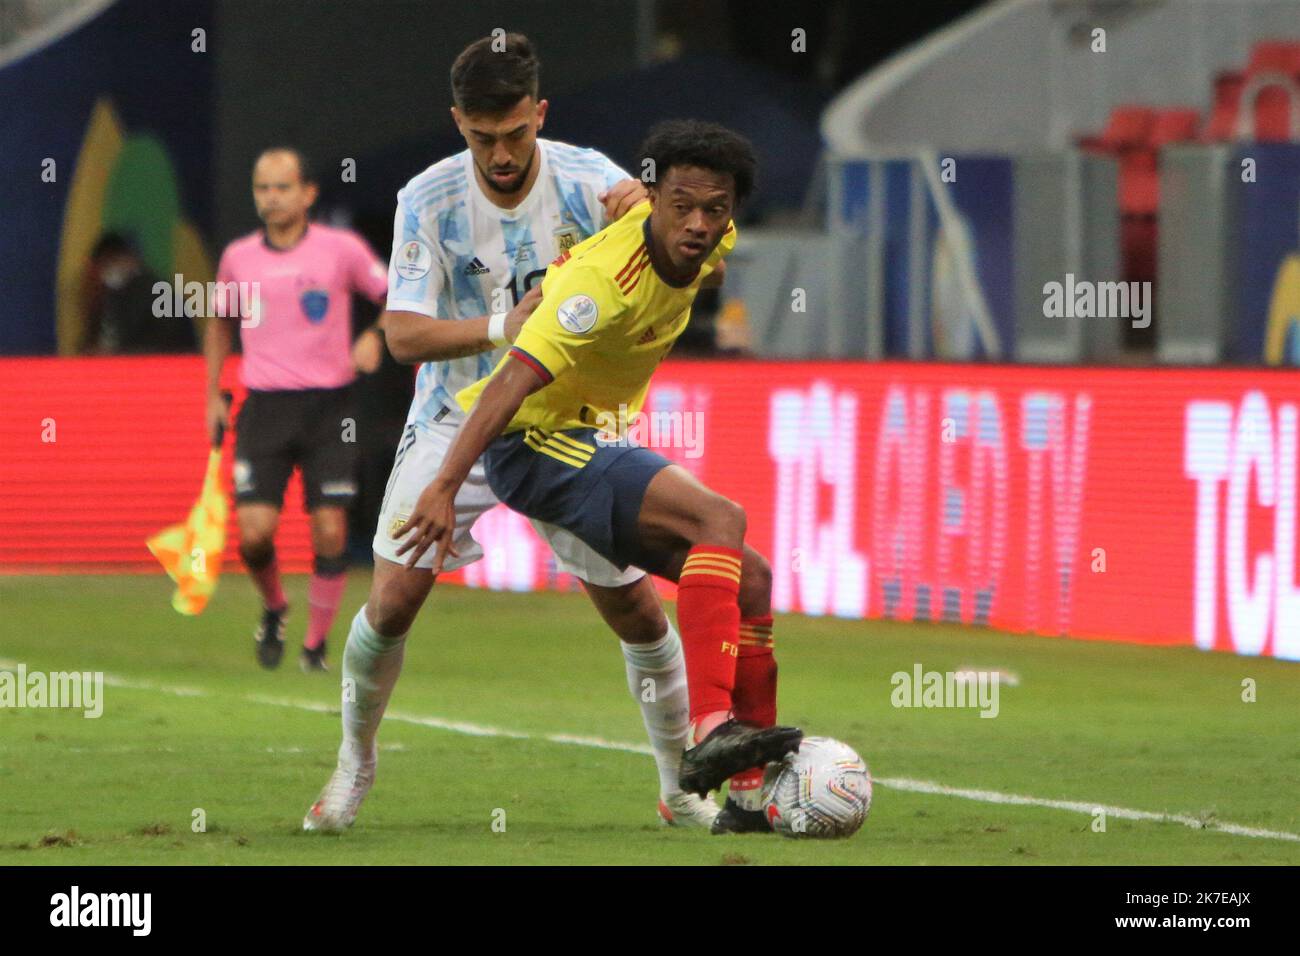 ©Laurent Lairys/MAXPPP - lJ Cuandrado of Colombia and N Gonzales of Argentina during the Copa America 2021, semi-final football match between Argentina and Colombia on July 6, 2021 at Estádio Nacional Mané Garrincha in Brasilia, Brazil photos Laurent Lairys /MAXPPP Stock Photo